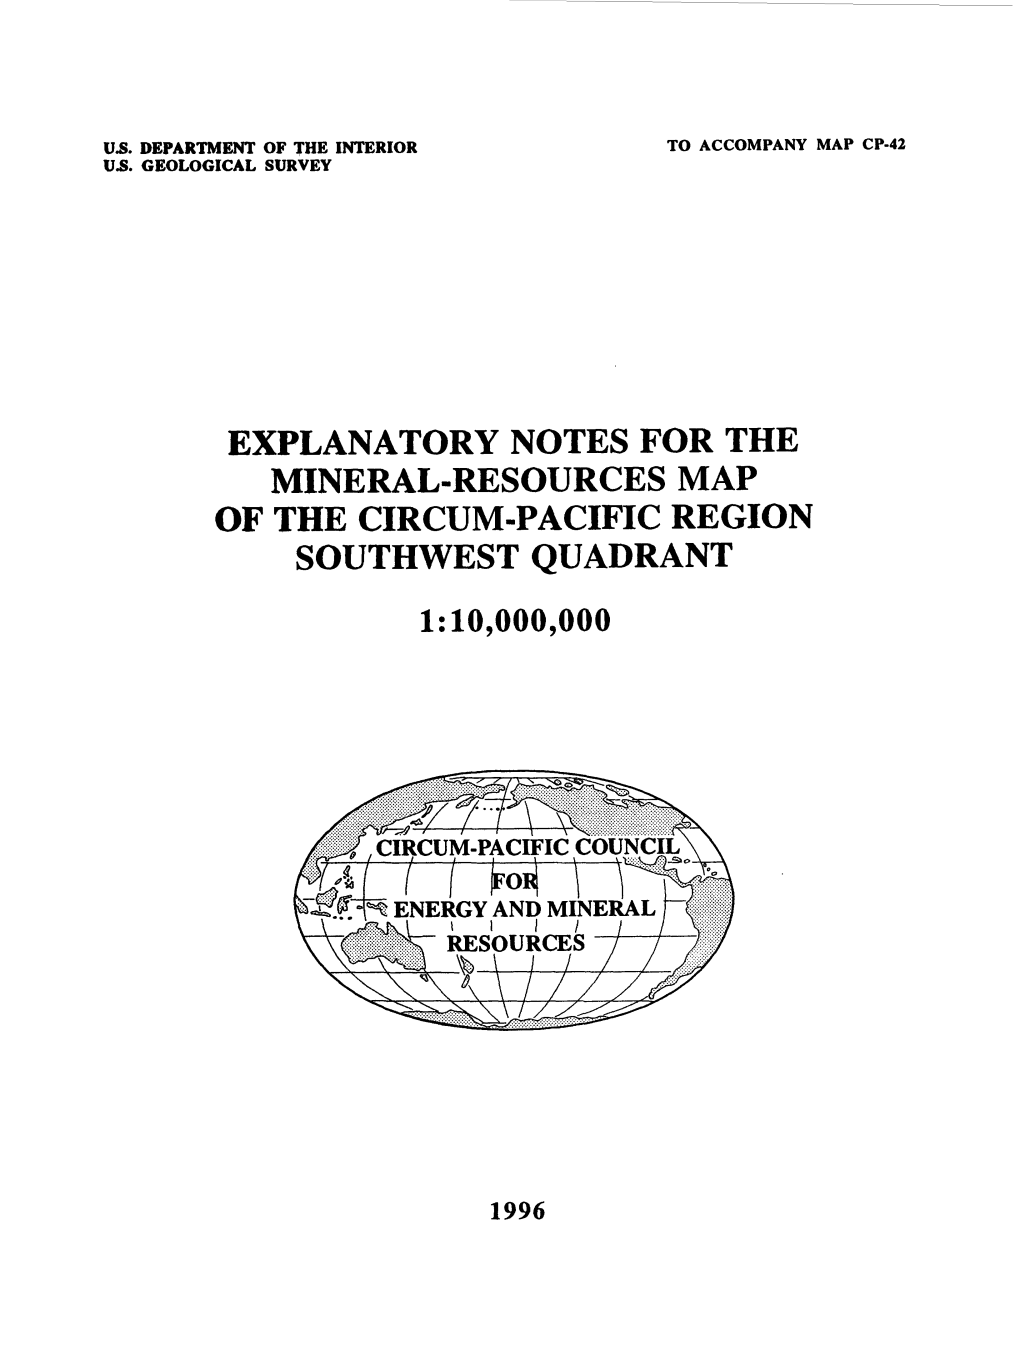 Explanatory Notes for the Mineral-Resources Map of the Circum-Pacific Region Southwest Quadrant 1:10,000,000